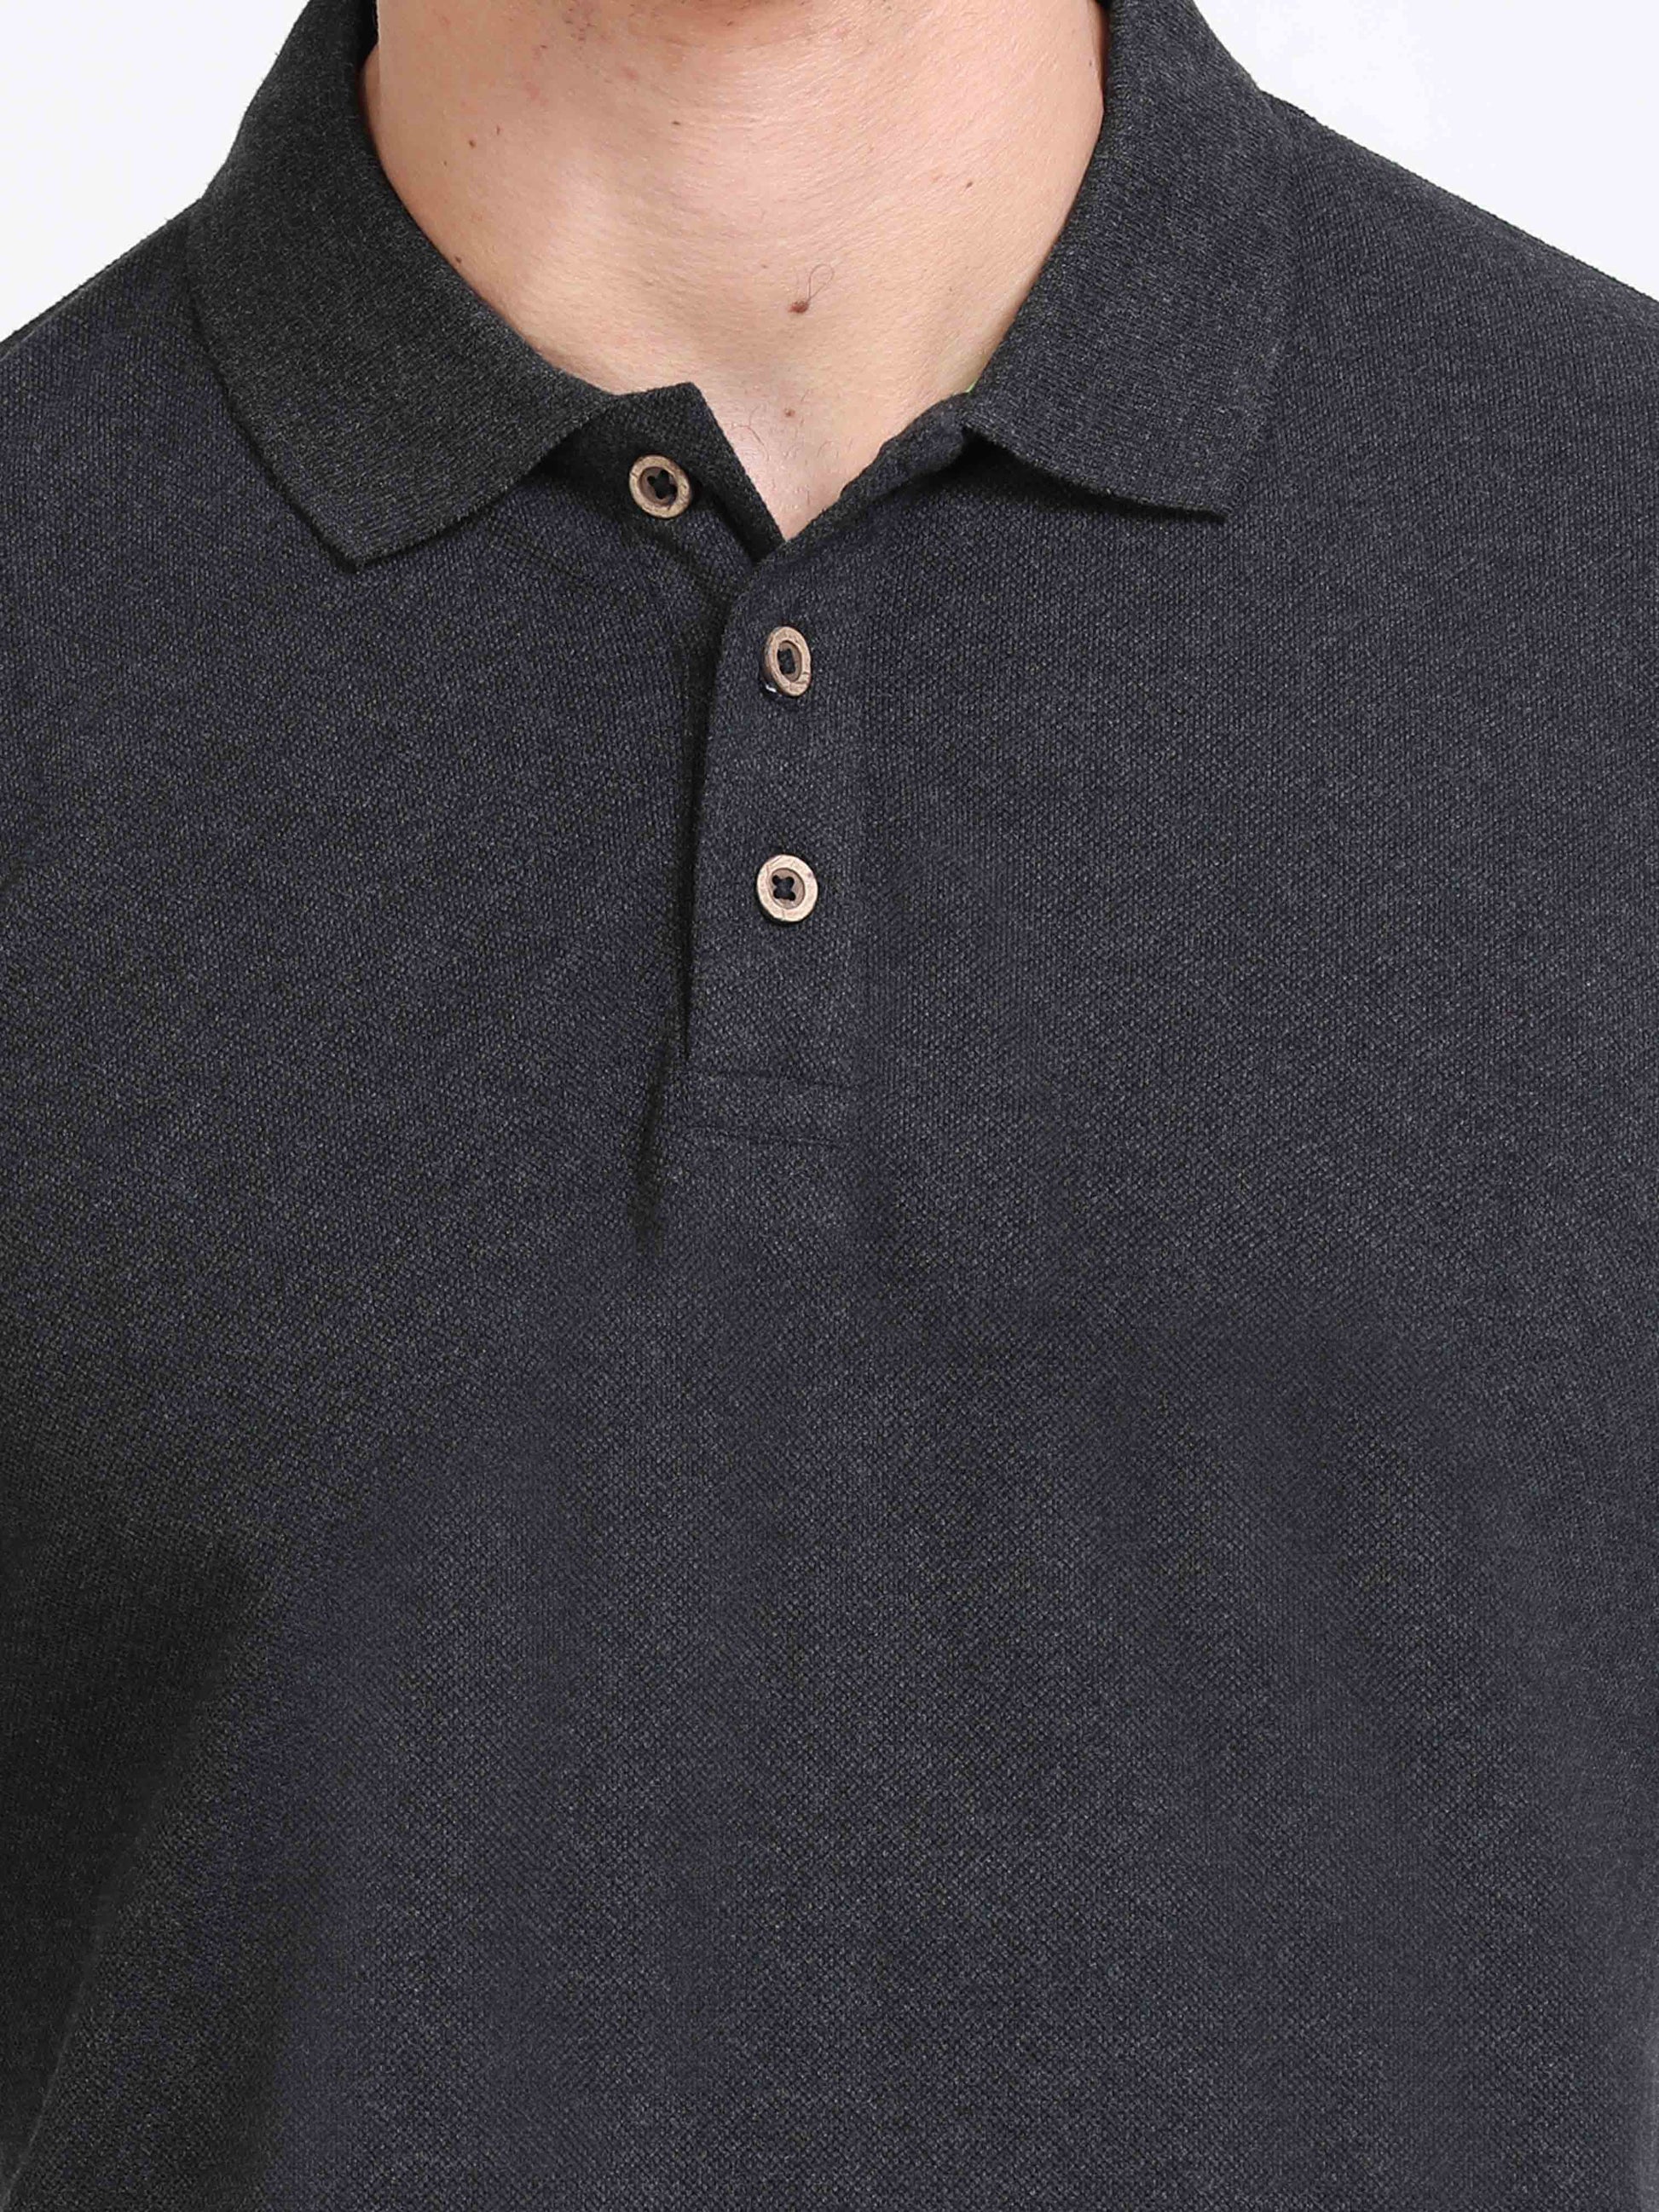 Sustainable Charcoal Cotton Polo T Shirt